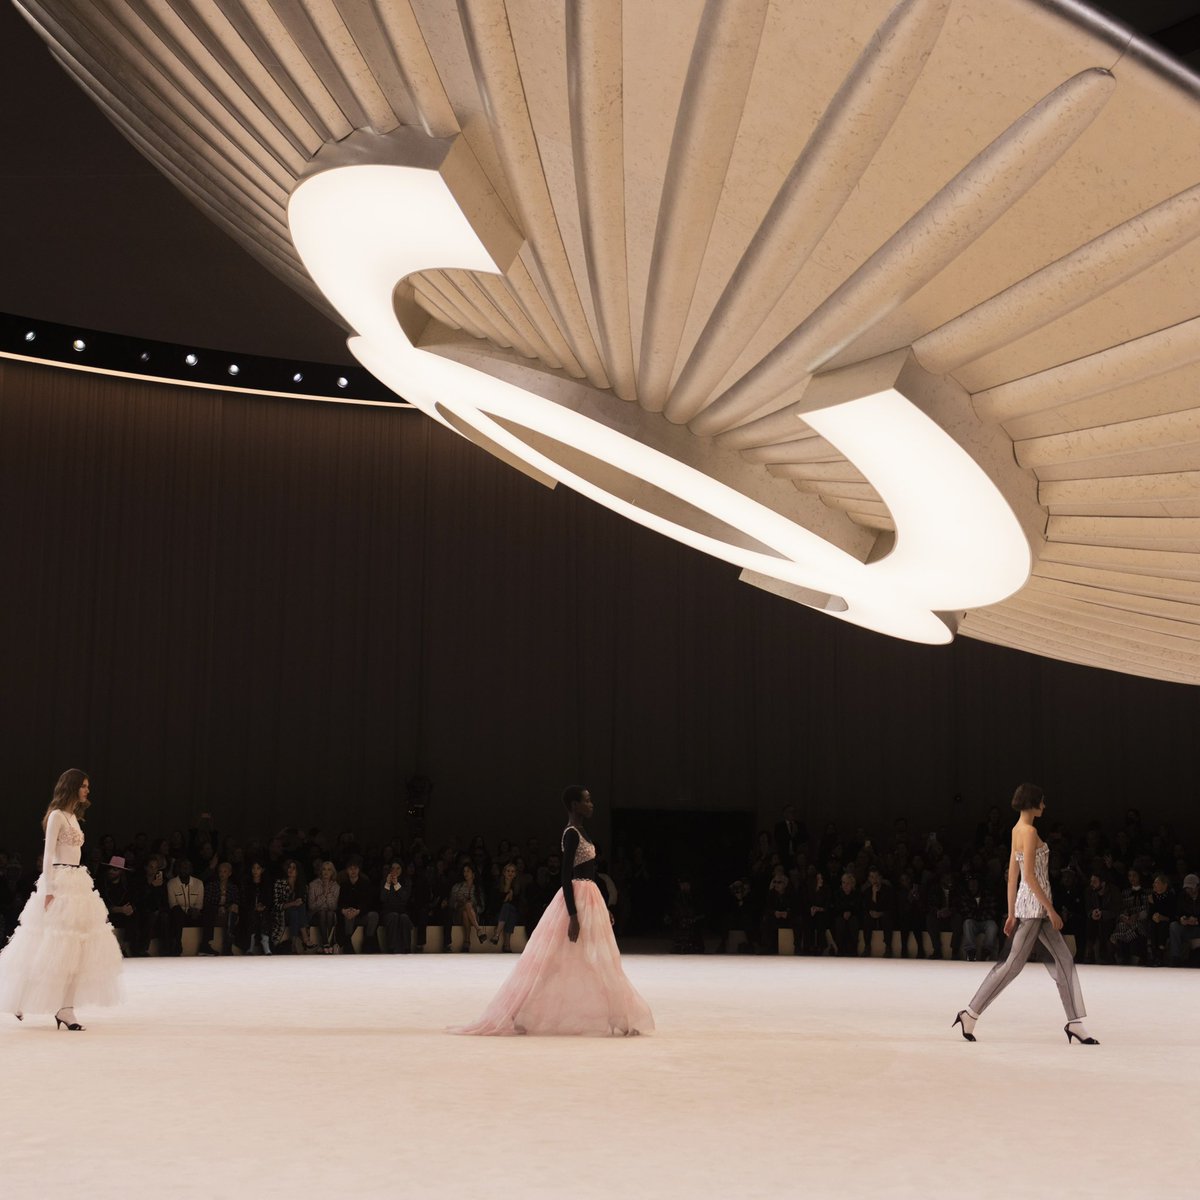 CHANEL Spring-Summer 2024 Haute Couture Show “The Button” Set design by Dave Free, @kendricklamar & @mikecarson. Serviced by @pglang Scored by @pglang Thank you to Virginie Viard and the entire CHANEL team involved.